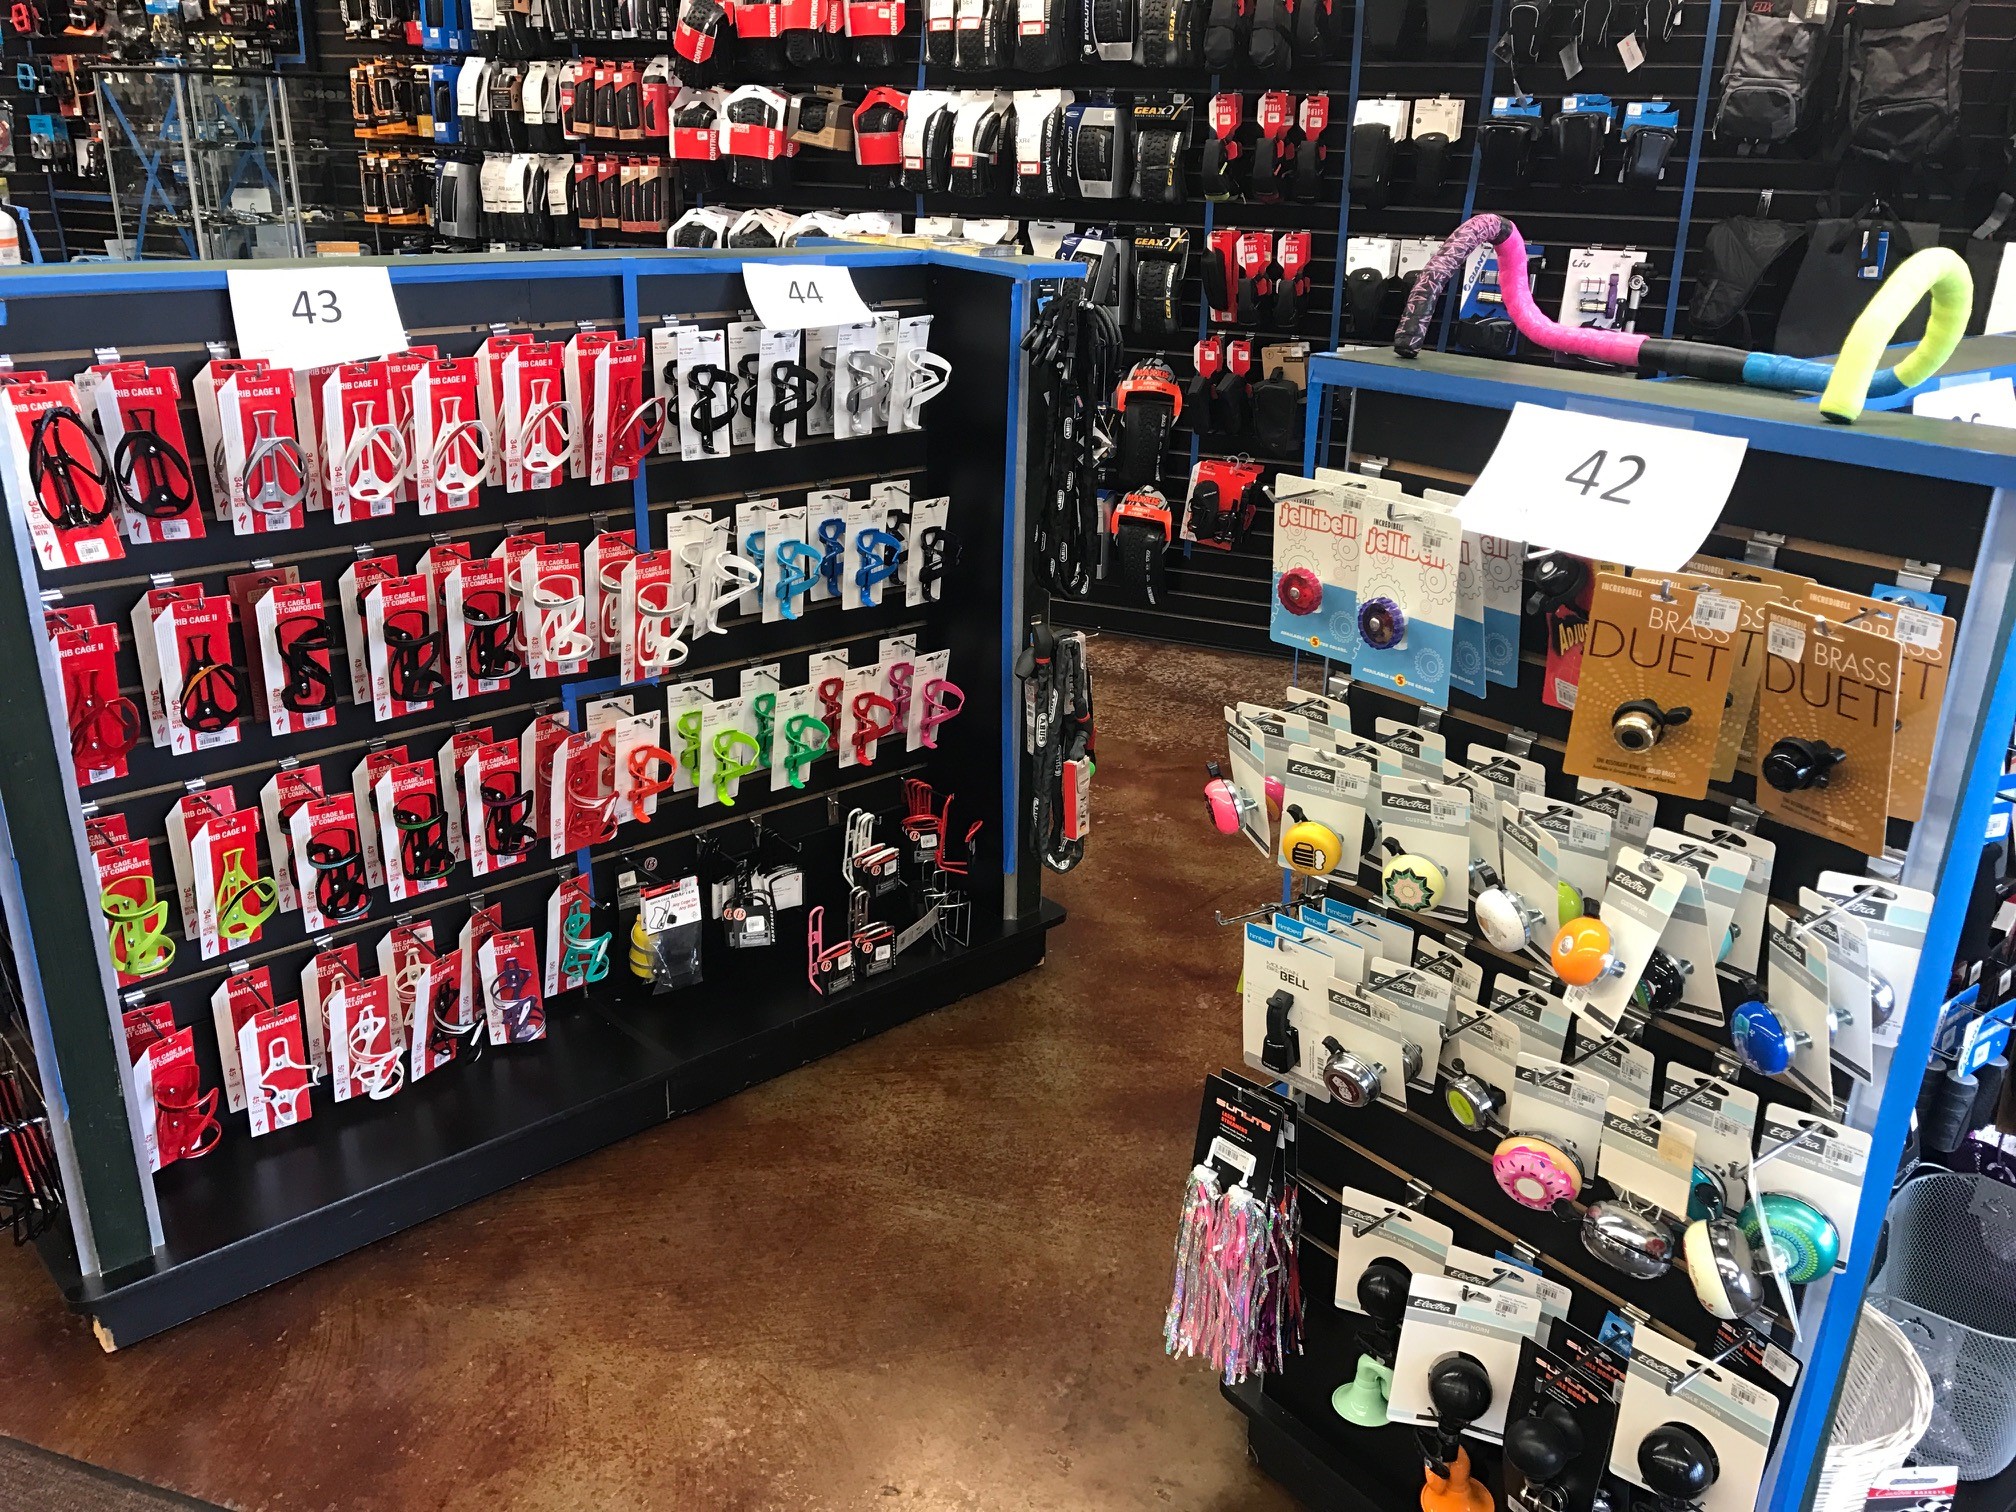 Photo of a store with the number 43 above a selection of water bottle cages with red packaging, the number 44 above bottle cages with white packaging.